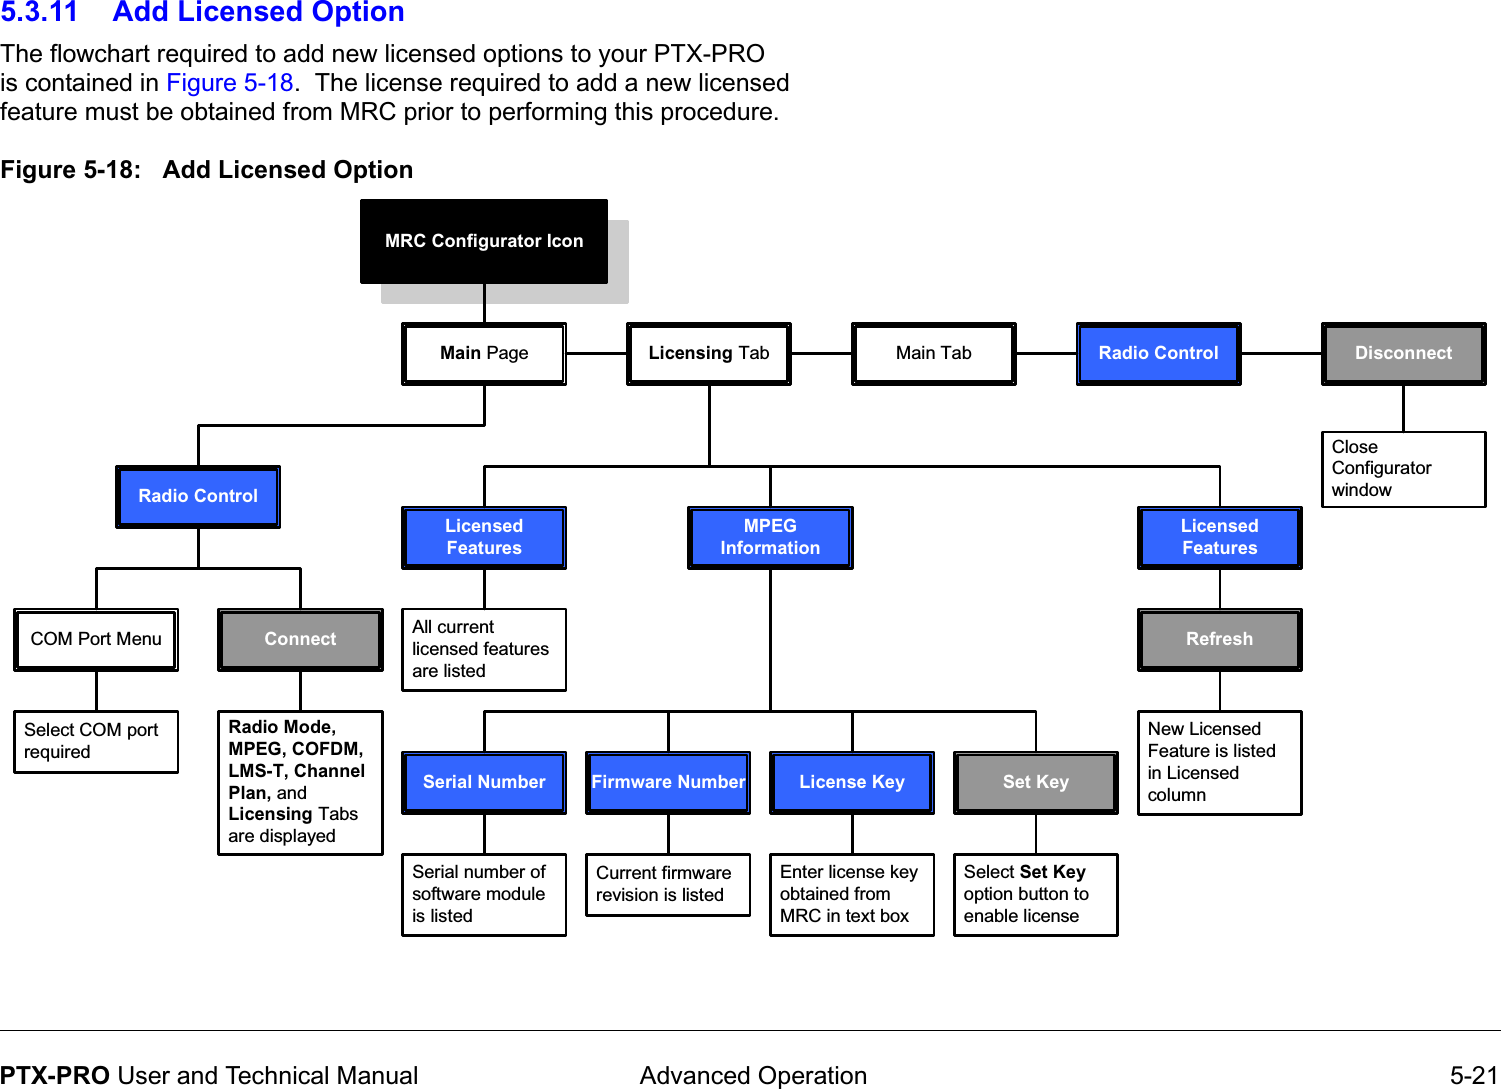  Advanced Operation 5-21PTX-PRO User and Technical Manual5.3.11 Add Licensed OptionThe flowchart required to add new licensed options to your PTX-PRO is contained in Figure 5-18.  The license required to add a new licensed feature must be obtained from MRC prior to performing this procedure.Figure 5-18:   Add Licensed Option MRC Configurator IconMain PageRadio ControlCOM Port MenuSelect COM port requiredConnectRadio Mode, MPEG, COFDM, LMS-T, Channel Plan, and Licensing Tabs are displayedLicensing TabLicensed FeaturesAll current licensed features are listedRefreshNew Licensed Feature is listed in Licensed columnMPEG InformationFirmware NumberCurrent firmware revision is listedLicense KeyEnter license key obtained from MRC in text boxSerial NumberSerial number of software module is listedSet KeySelect Set Key option button to enable licenseLicensed FeaturesDisconnectClose Configurator windowRadio ControlMain Tab